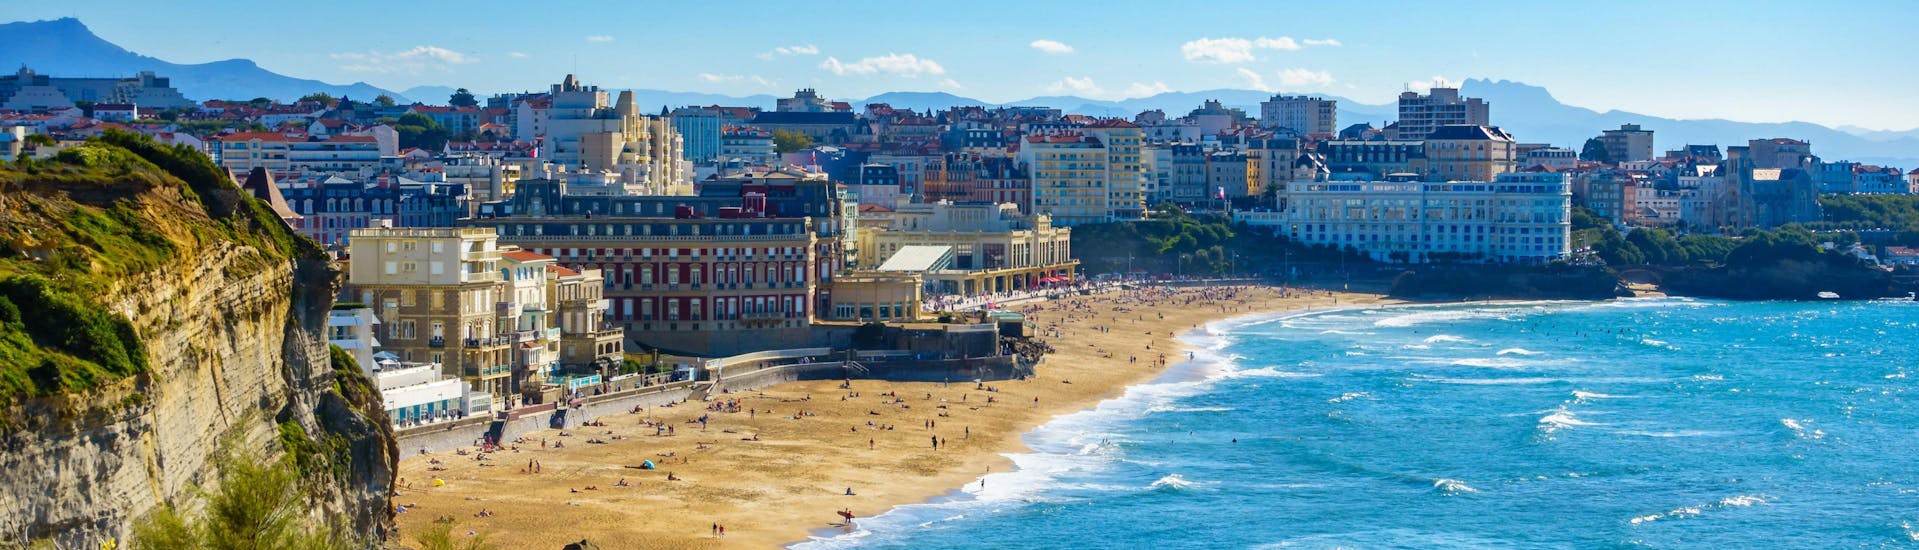 View of the bay of Biarritz and the Grand Plage, one of the surfing hotspots in the French Basque Country.